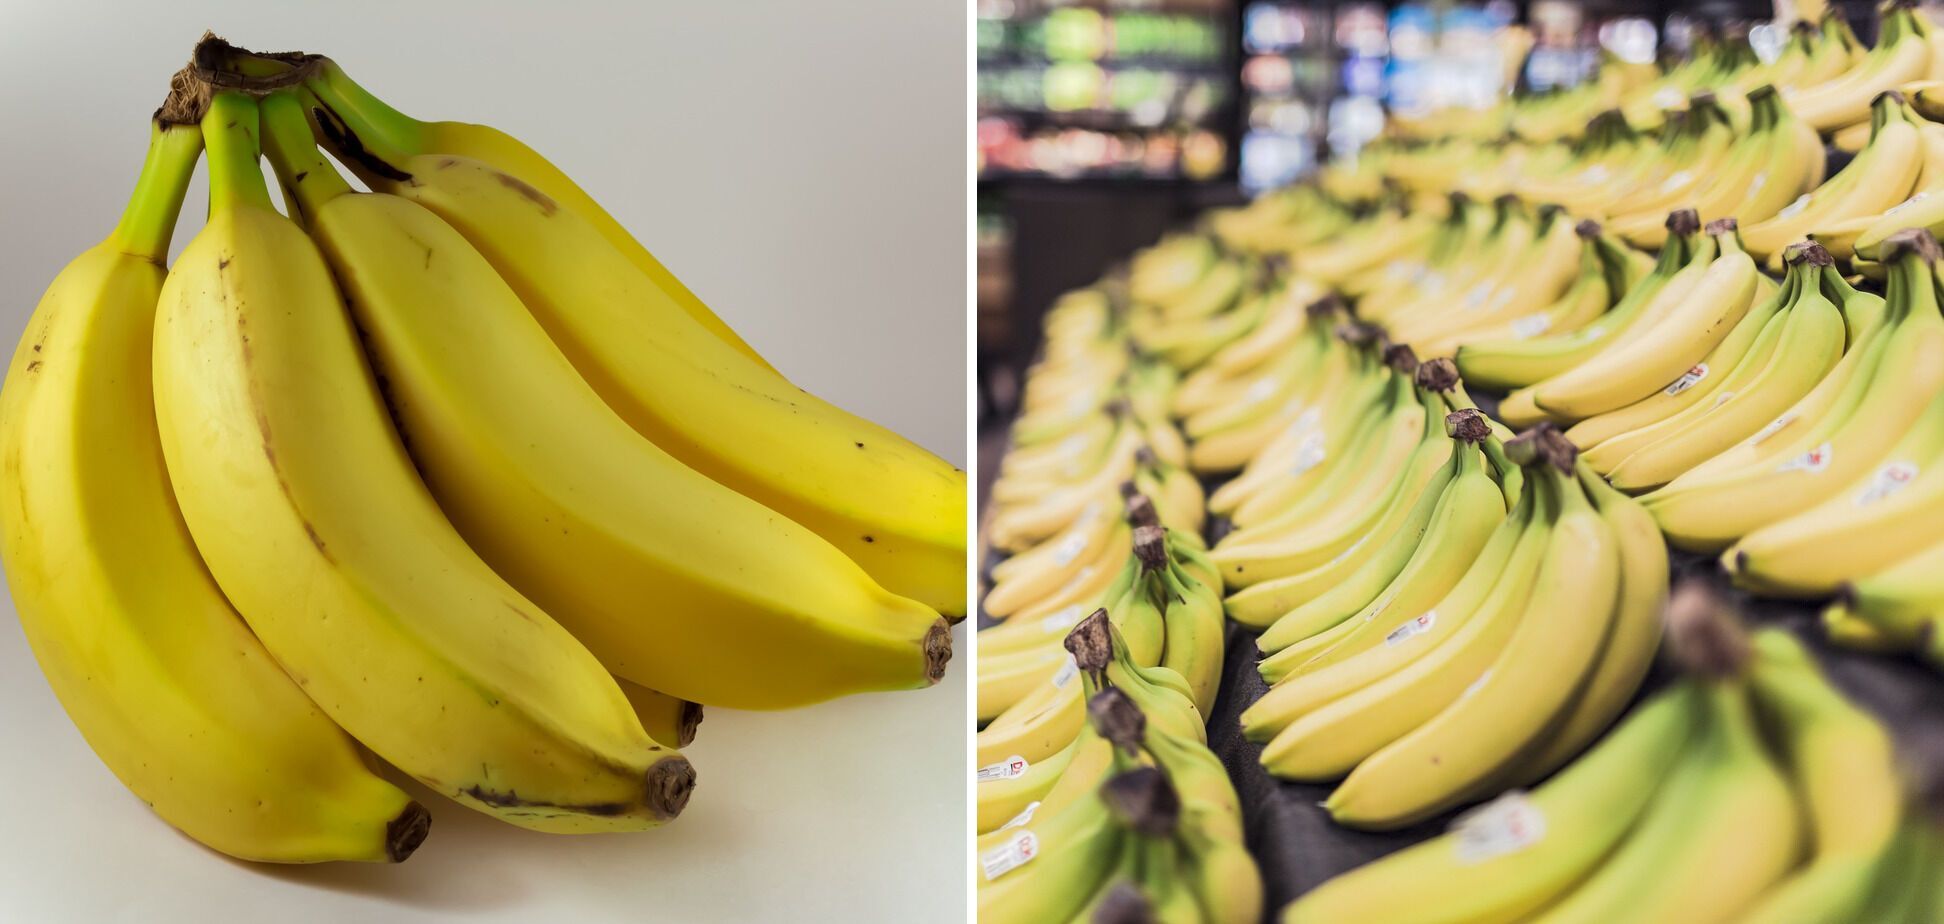 How to speed up the ripening process of bananas